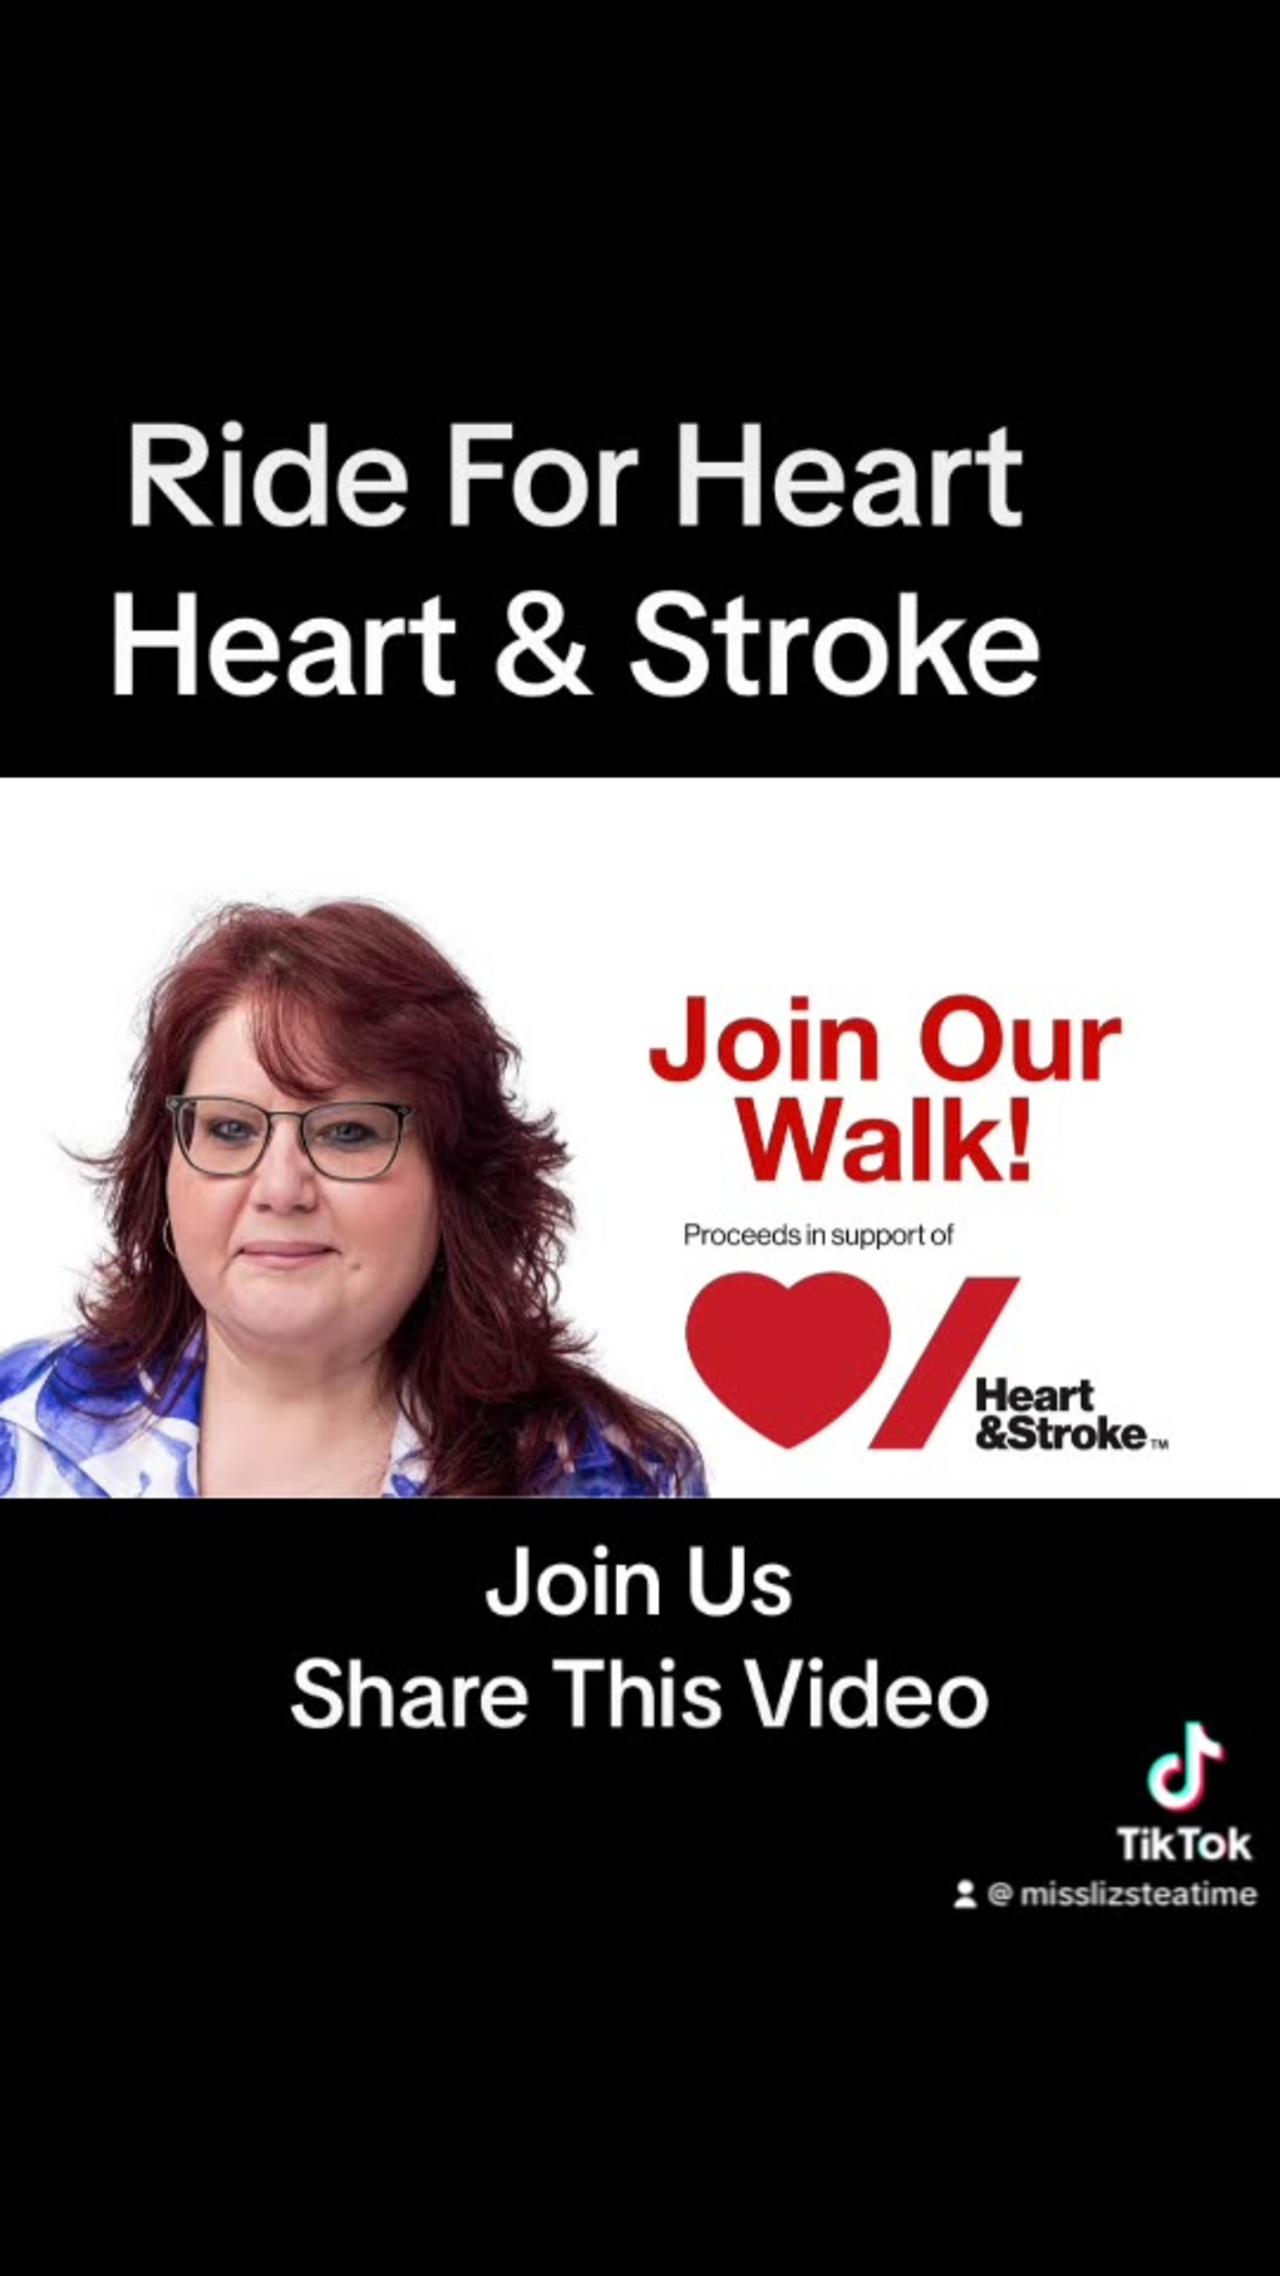 Walk for Heart and Stroke